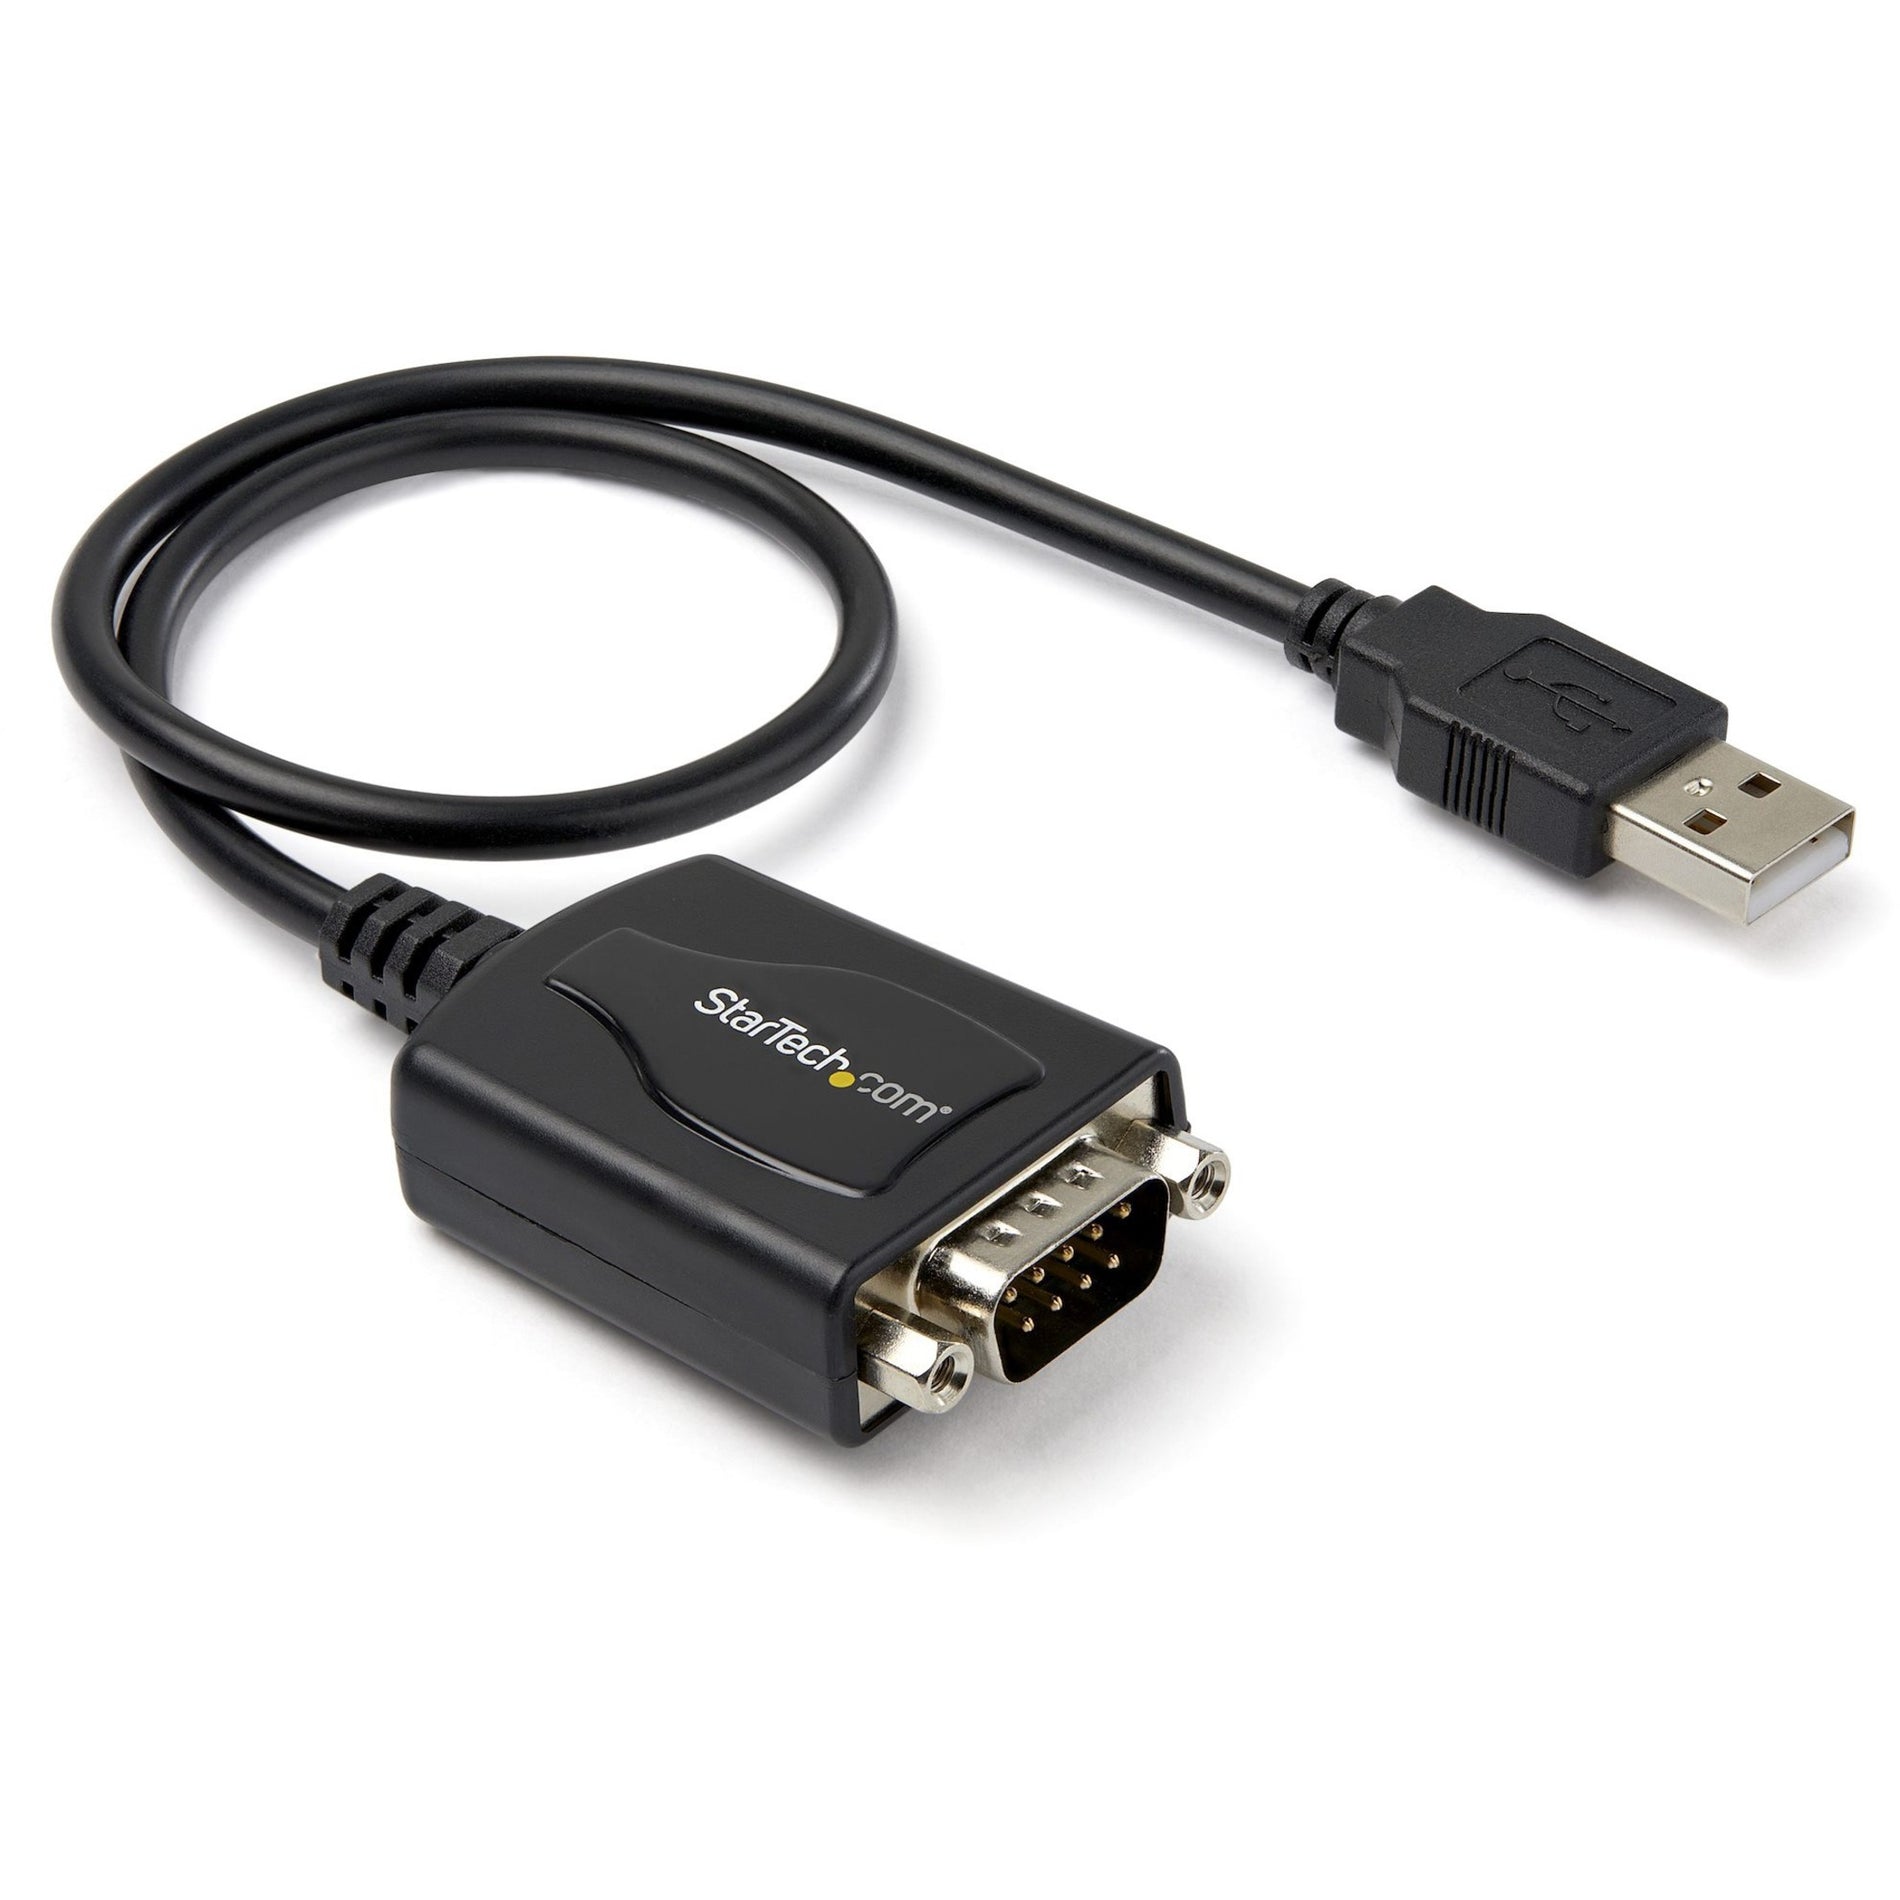 StarTech.com ICUSB2321X 1 Port Professional USB to Serial Adapter Cable with COM Retention, 2-Year Warranty, Windows Compatible